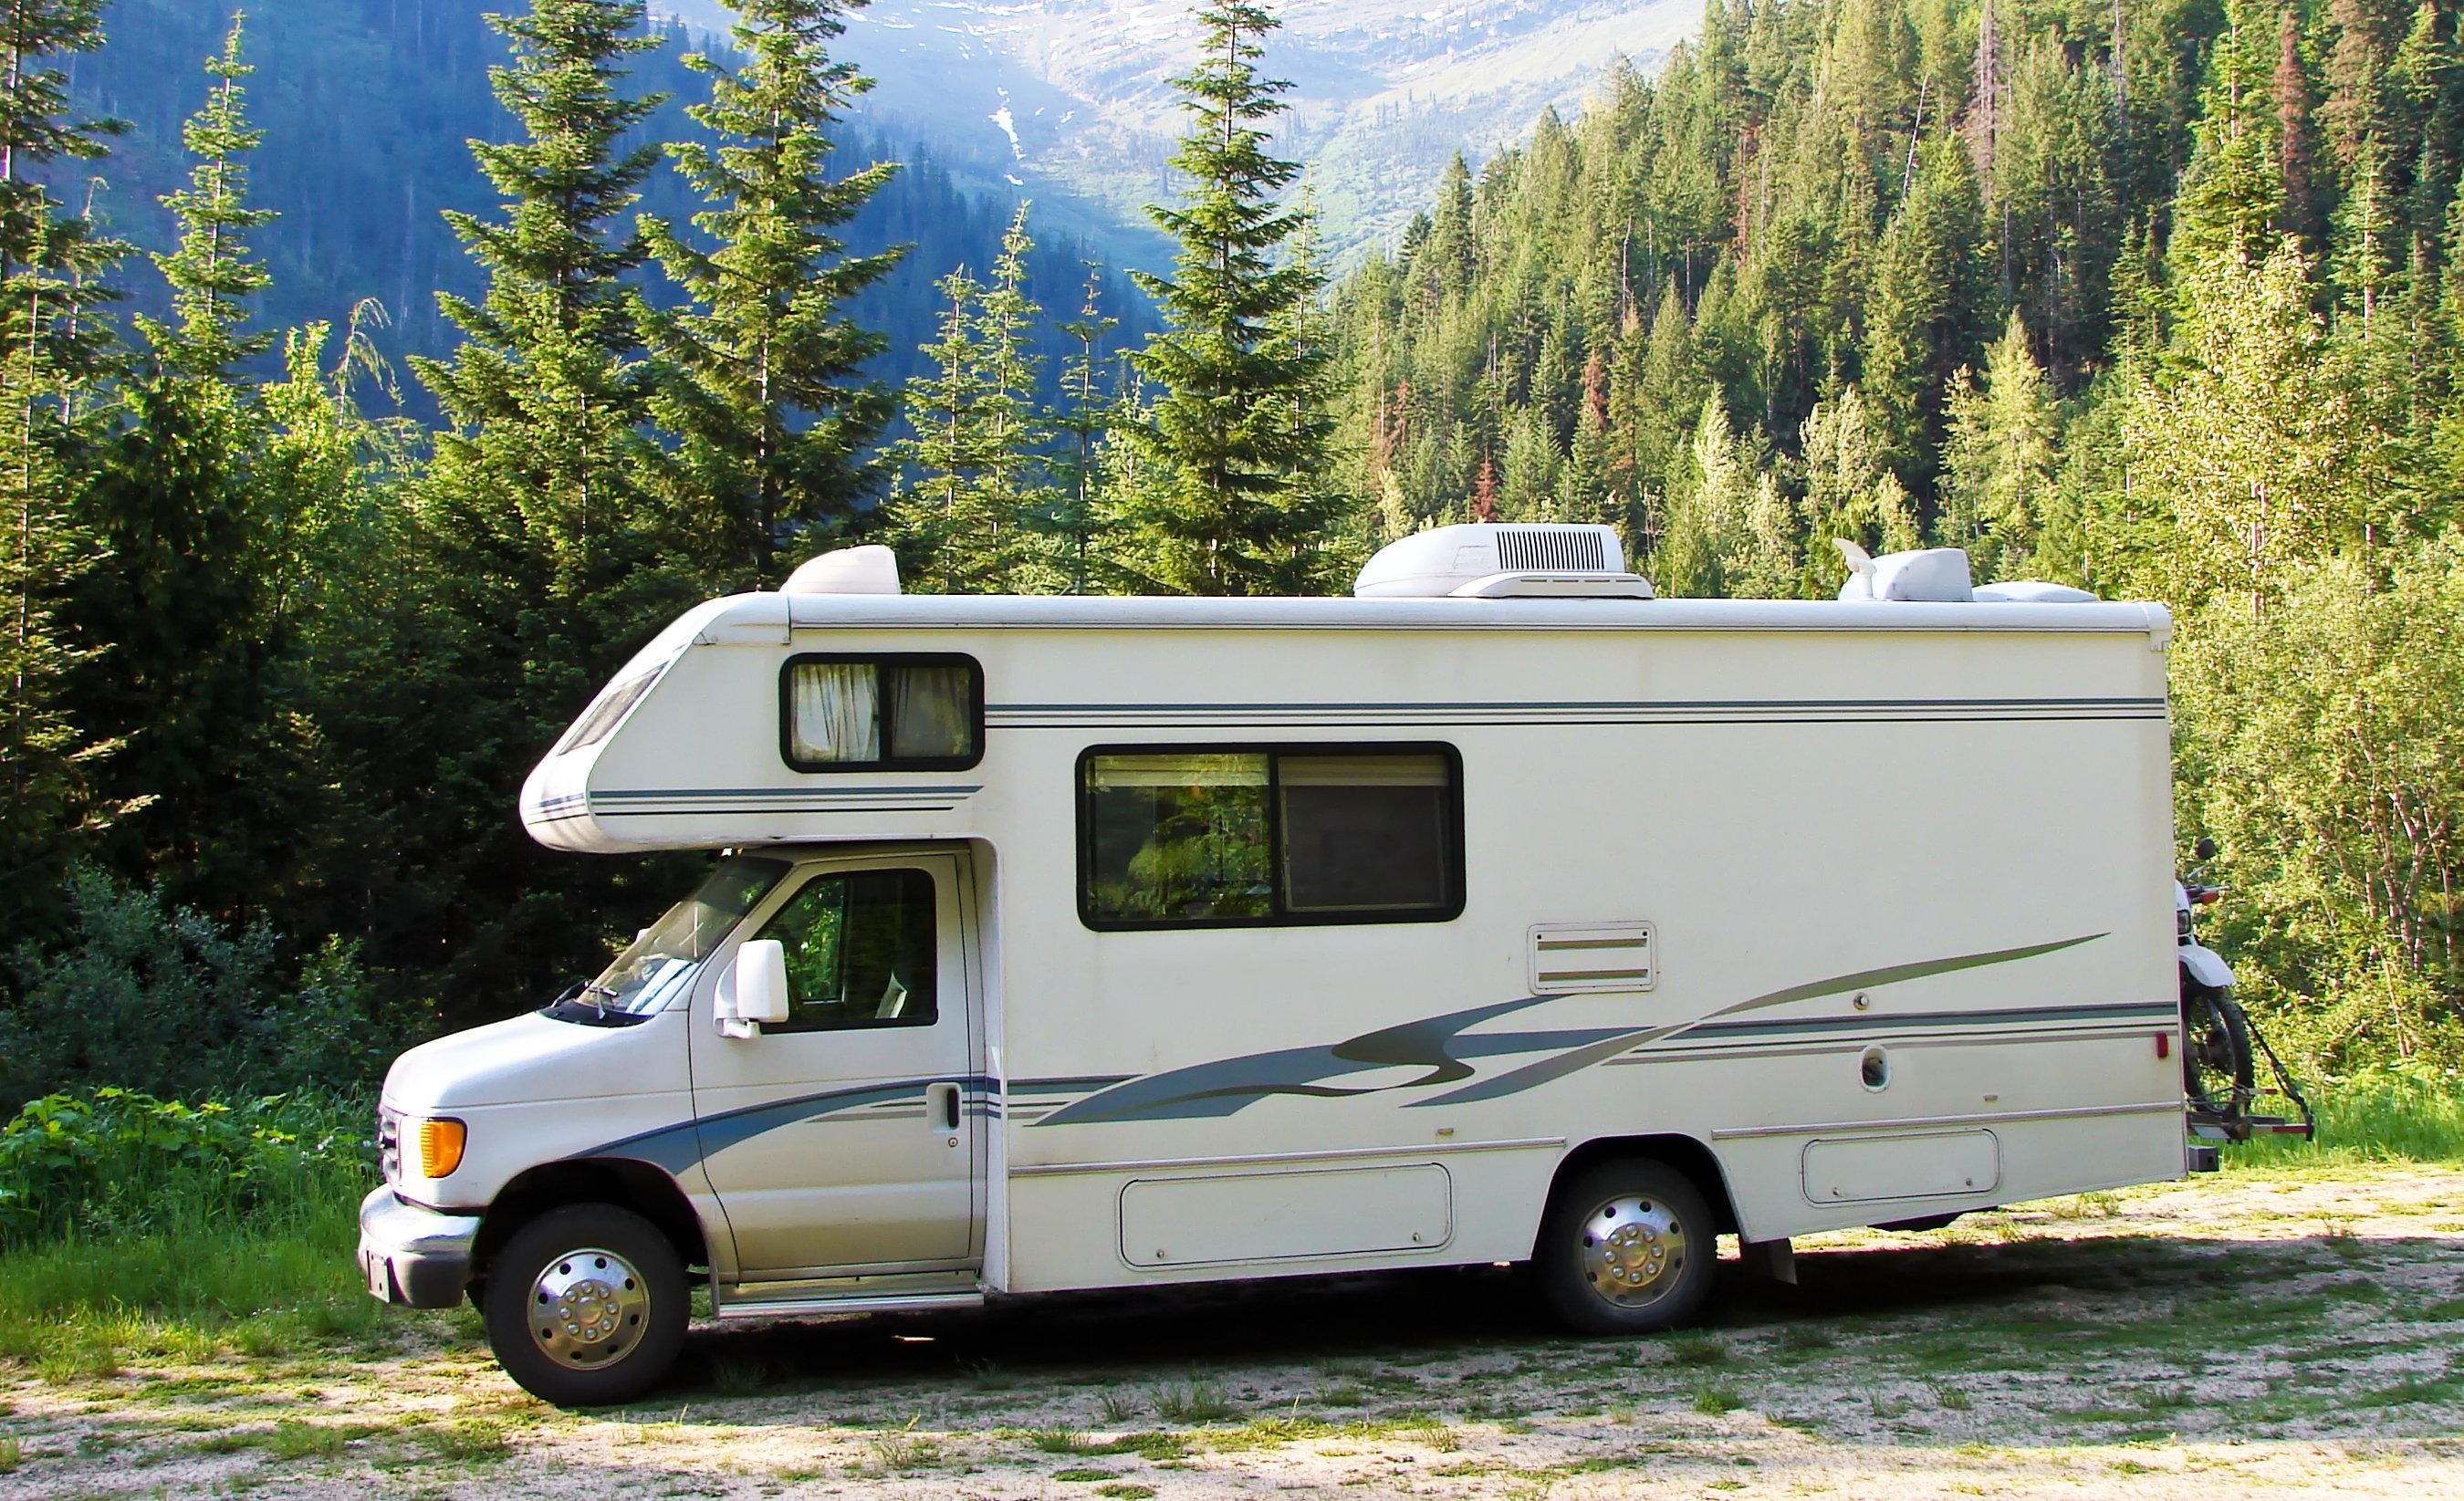 RV alone in front of landscape